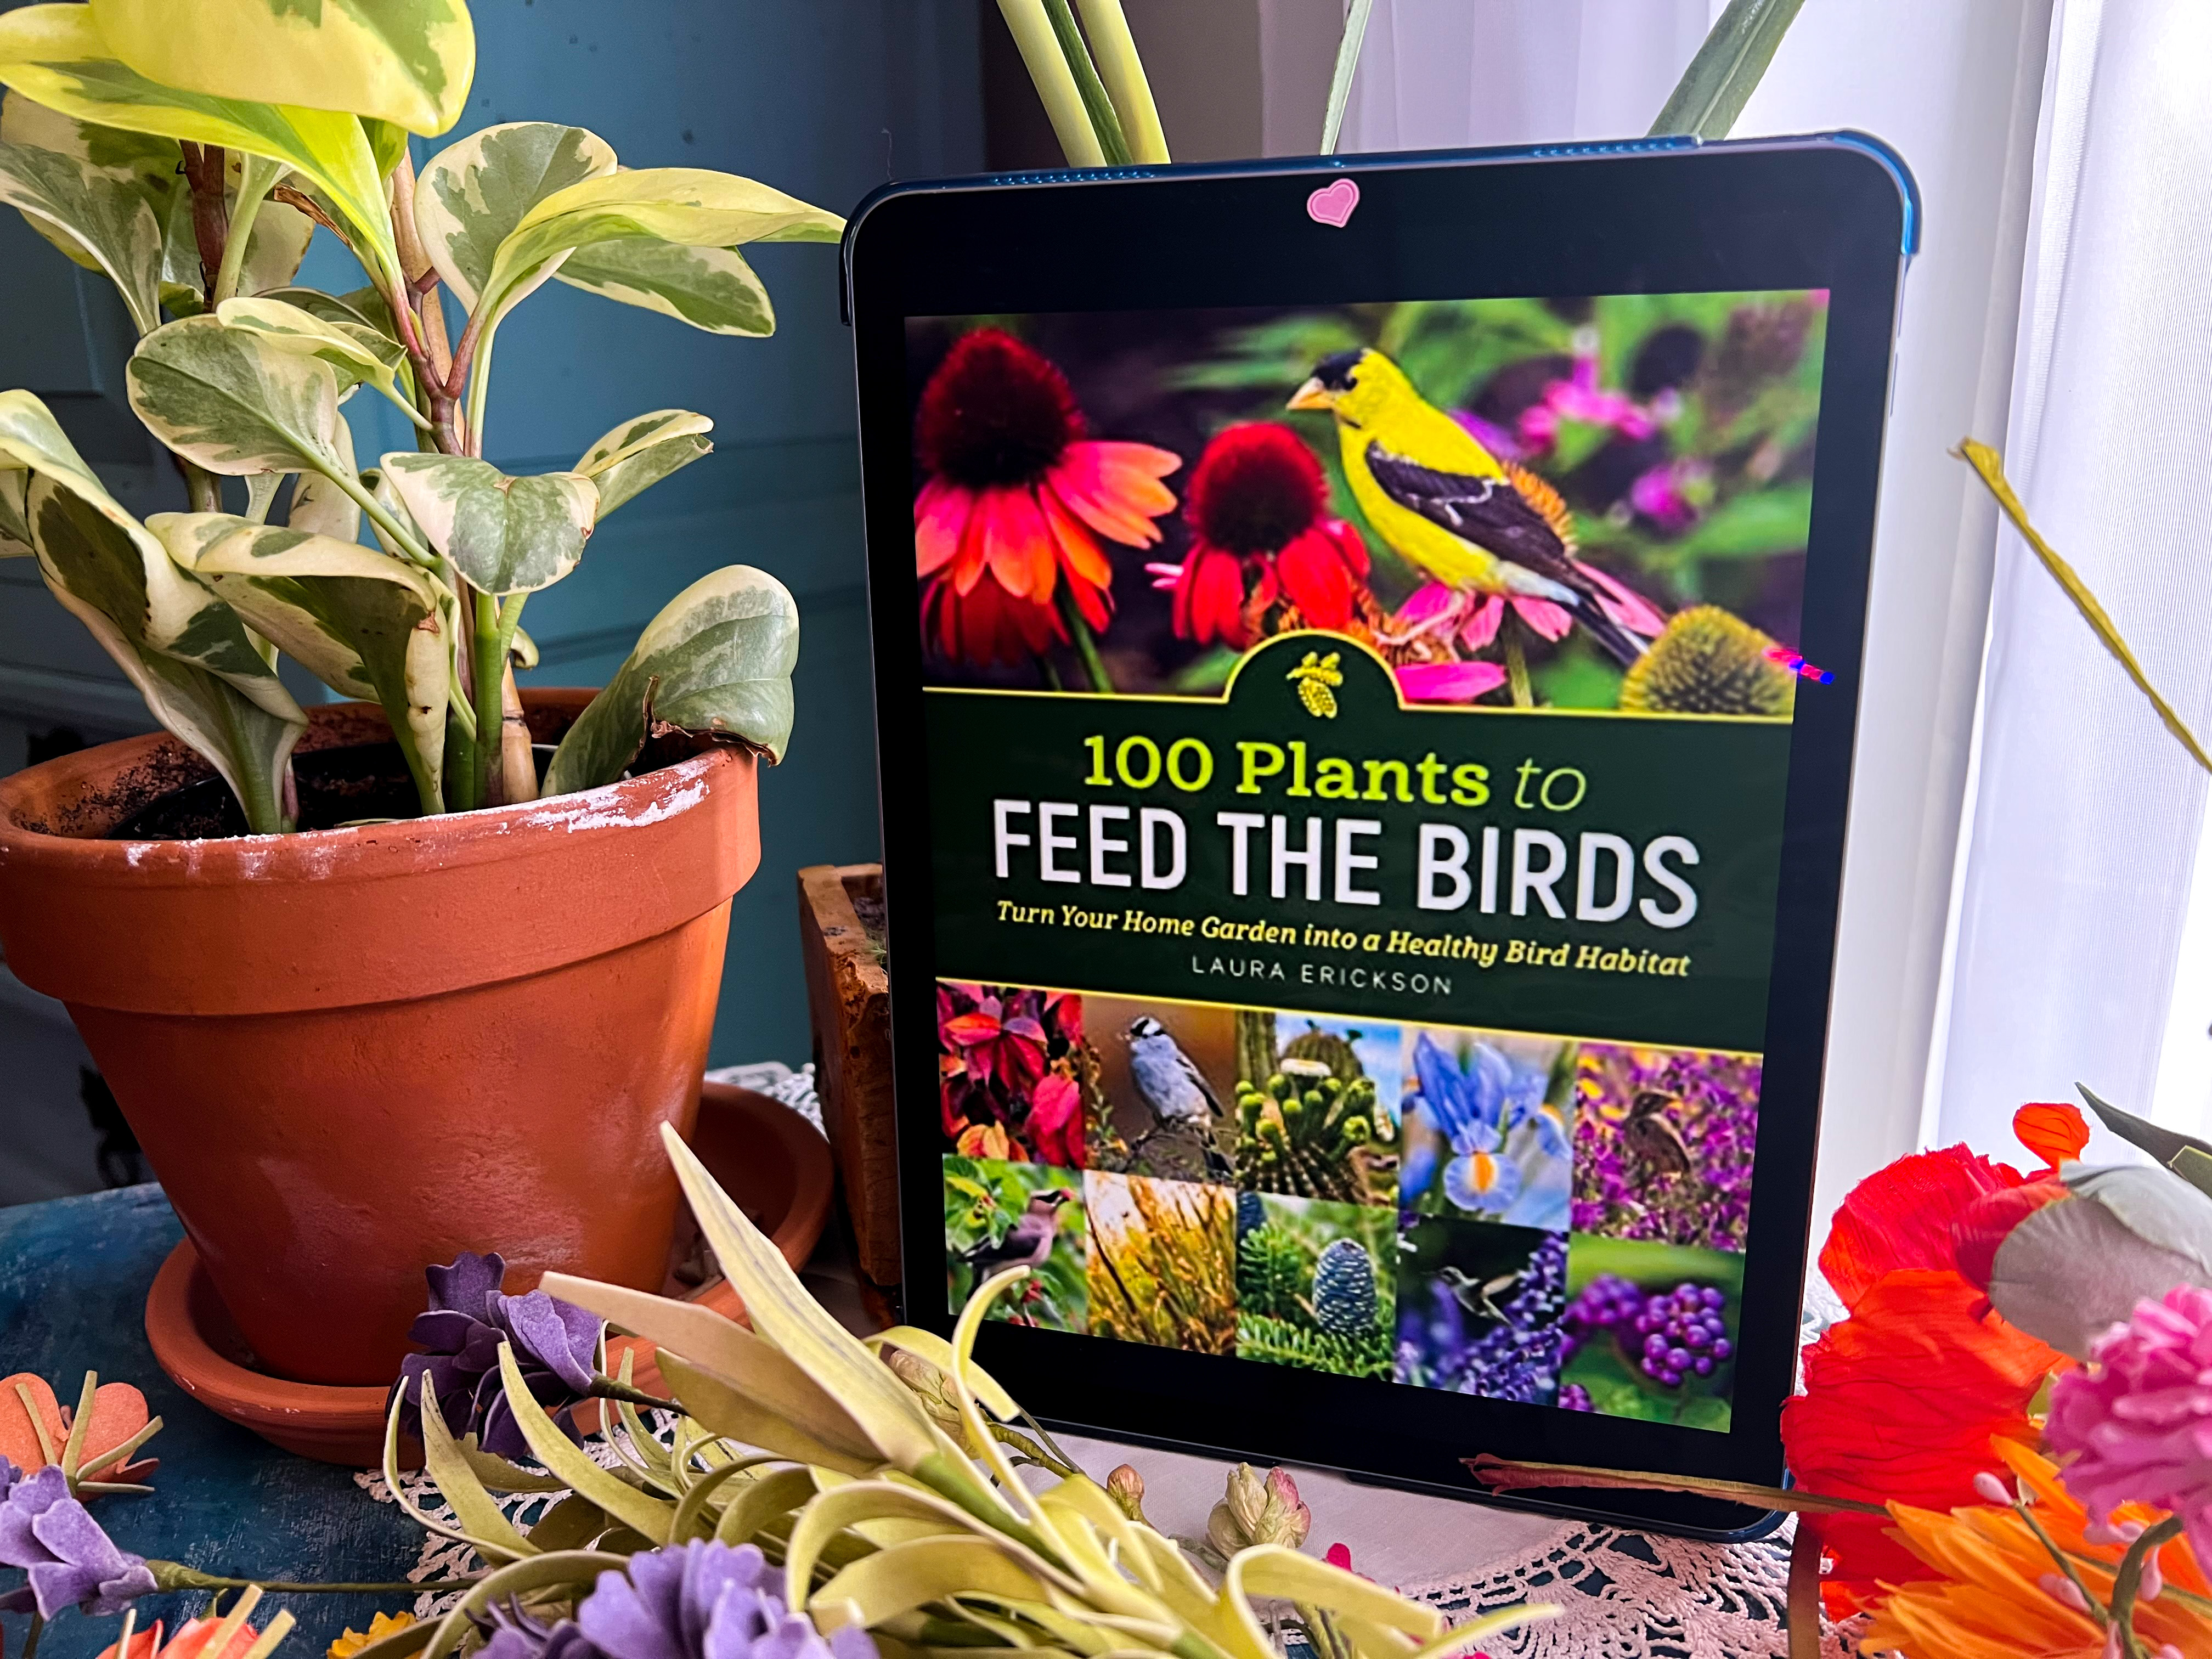 100 Plants to Feed the Birds by Laura Erickson